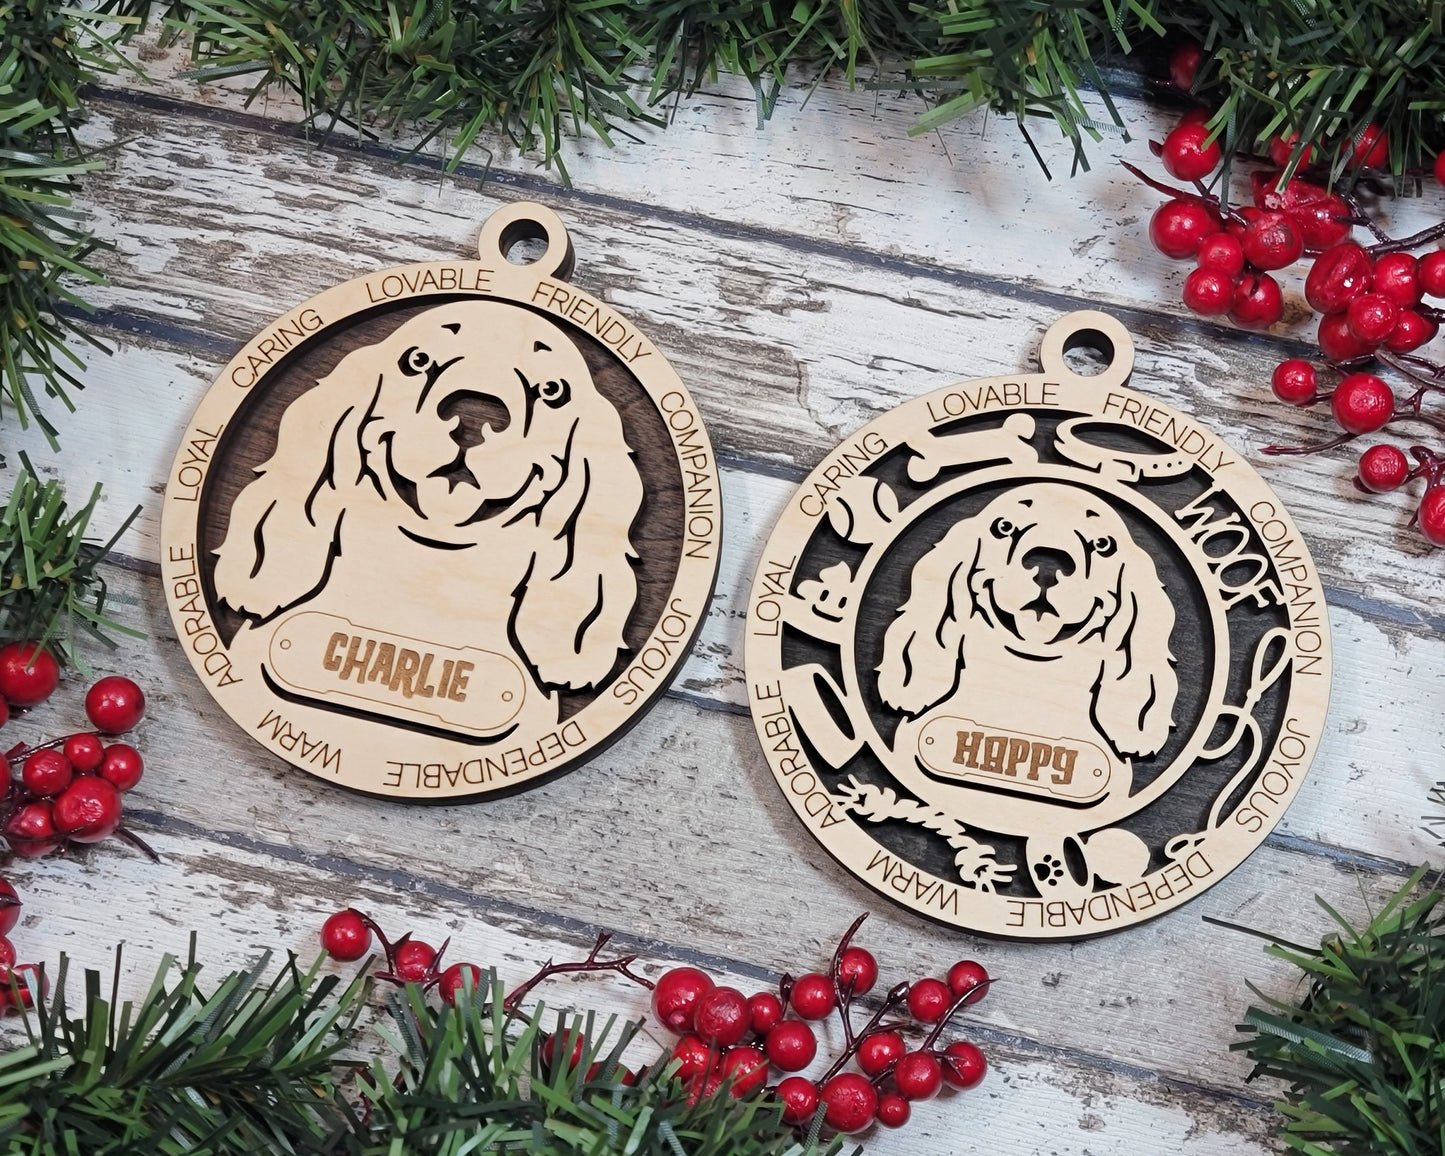 Cocker Spaniel - Adorable Dog Ornaments - 2 Ornaments included - SVG, PDF, AI File Download - Sized for Glowforge